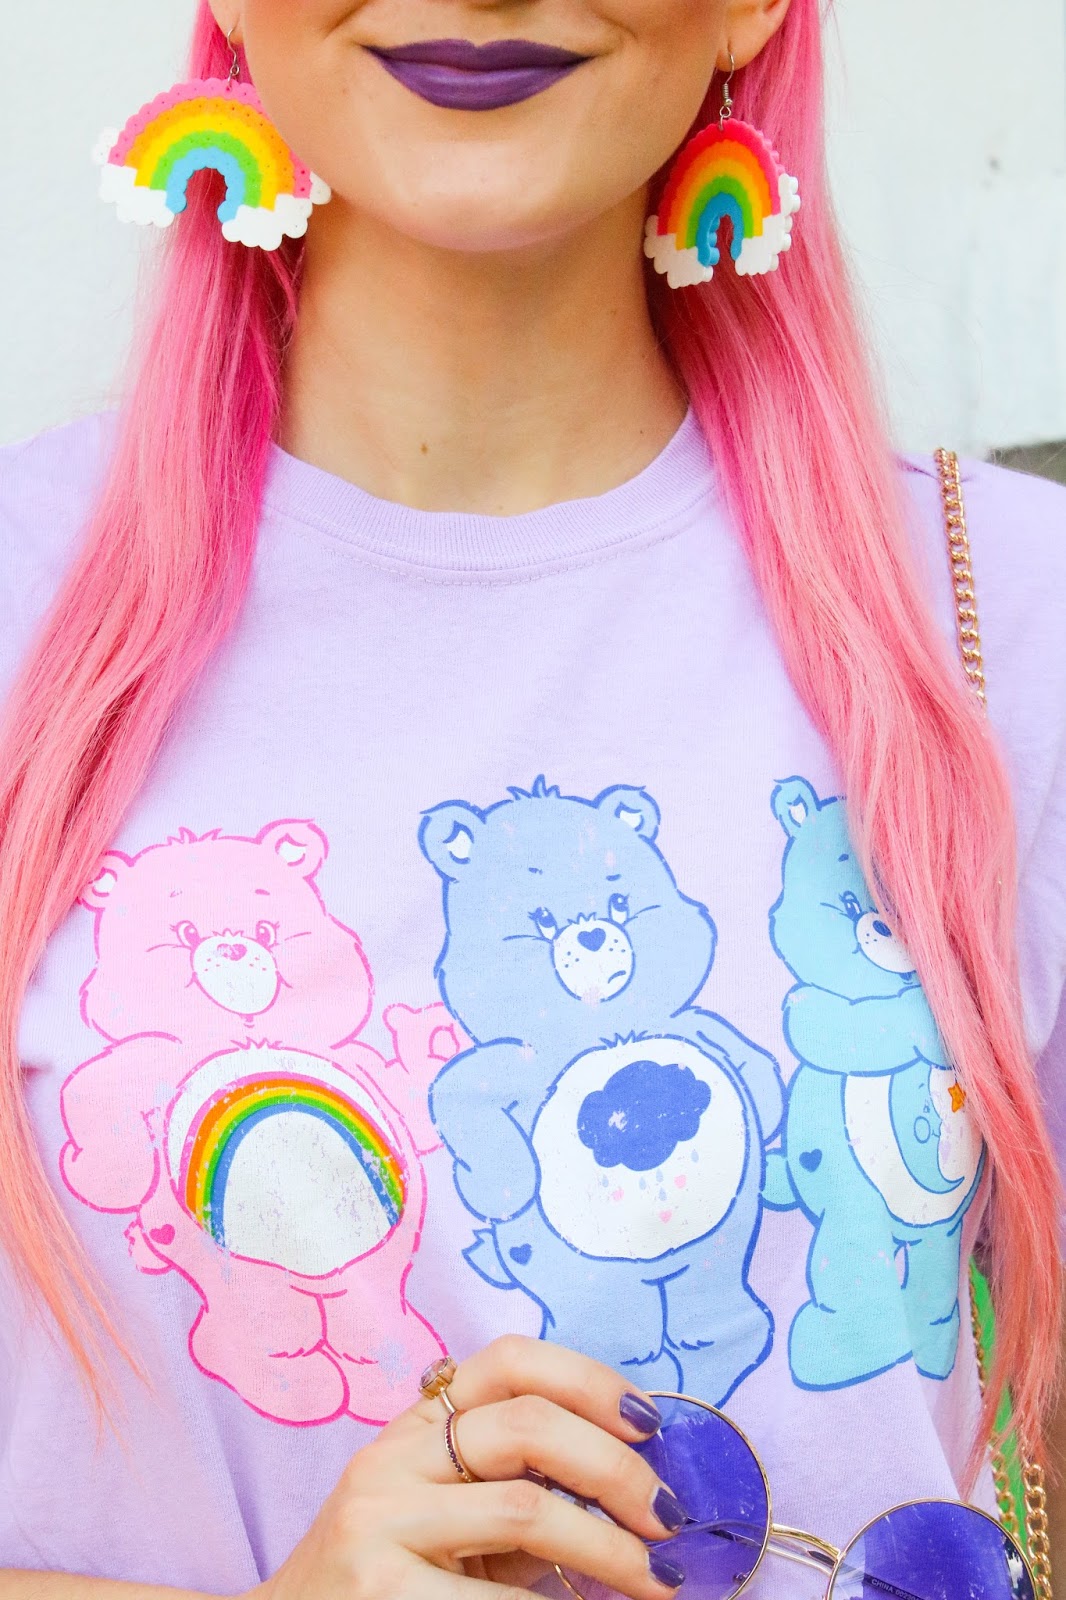 Super cute Care Bears inspired outfit